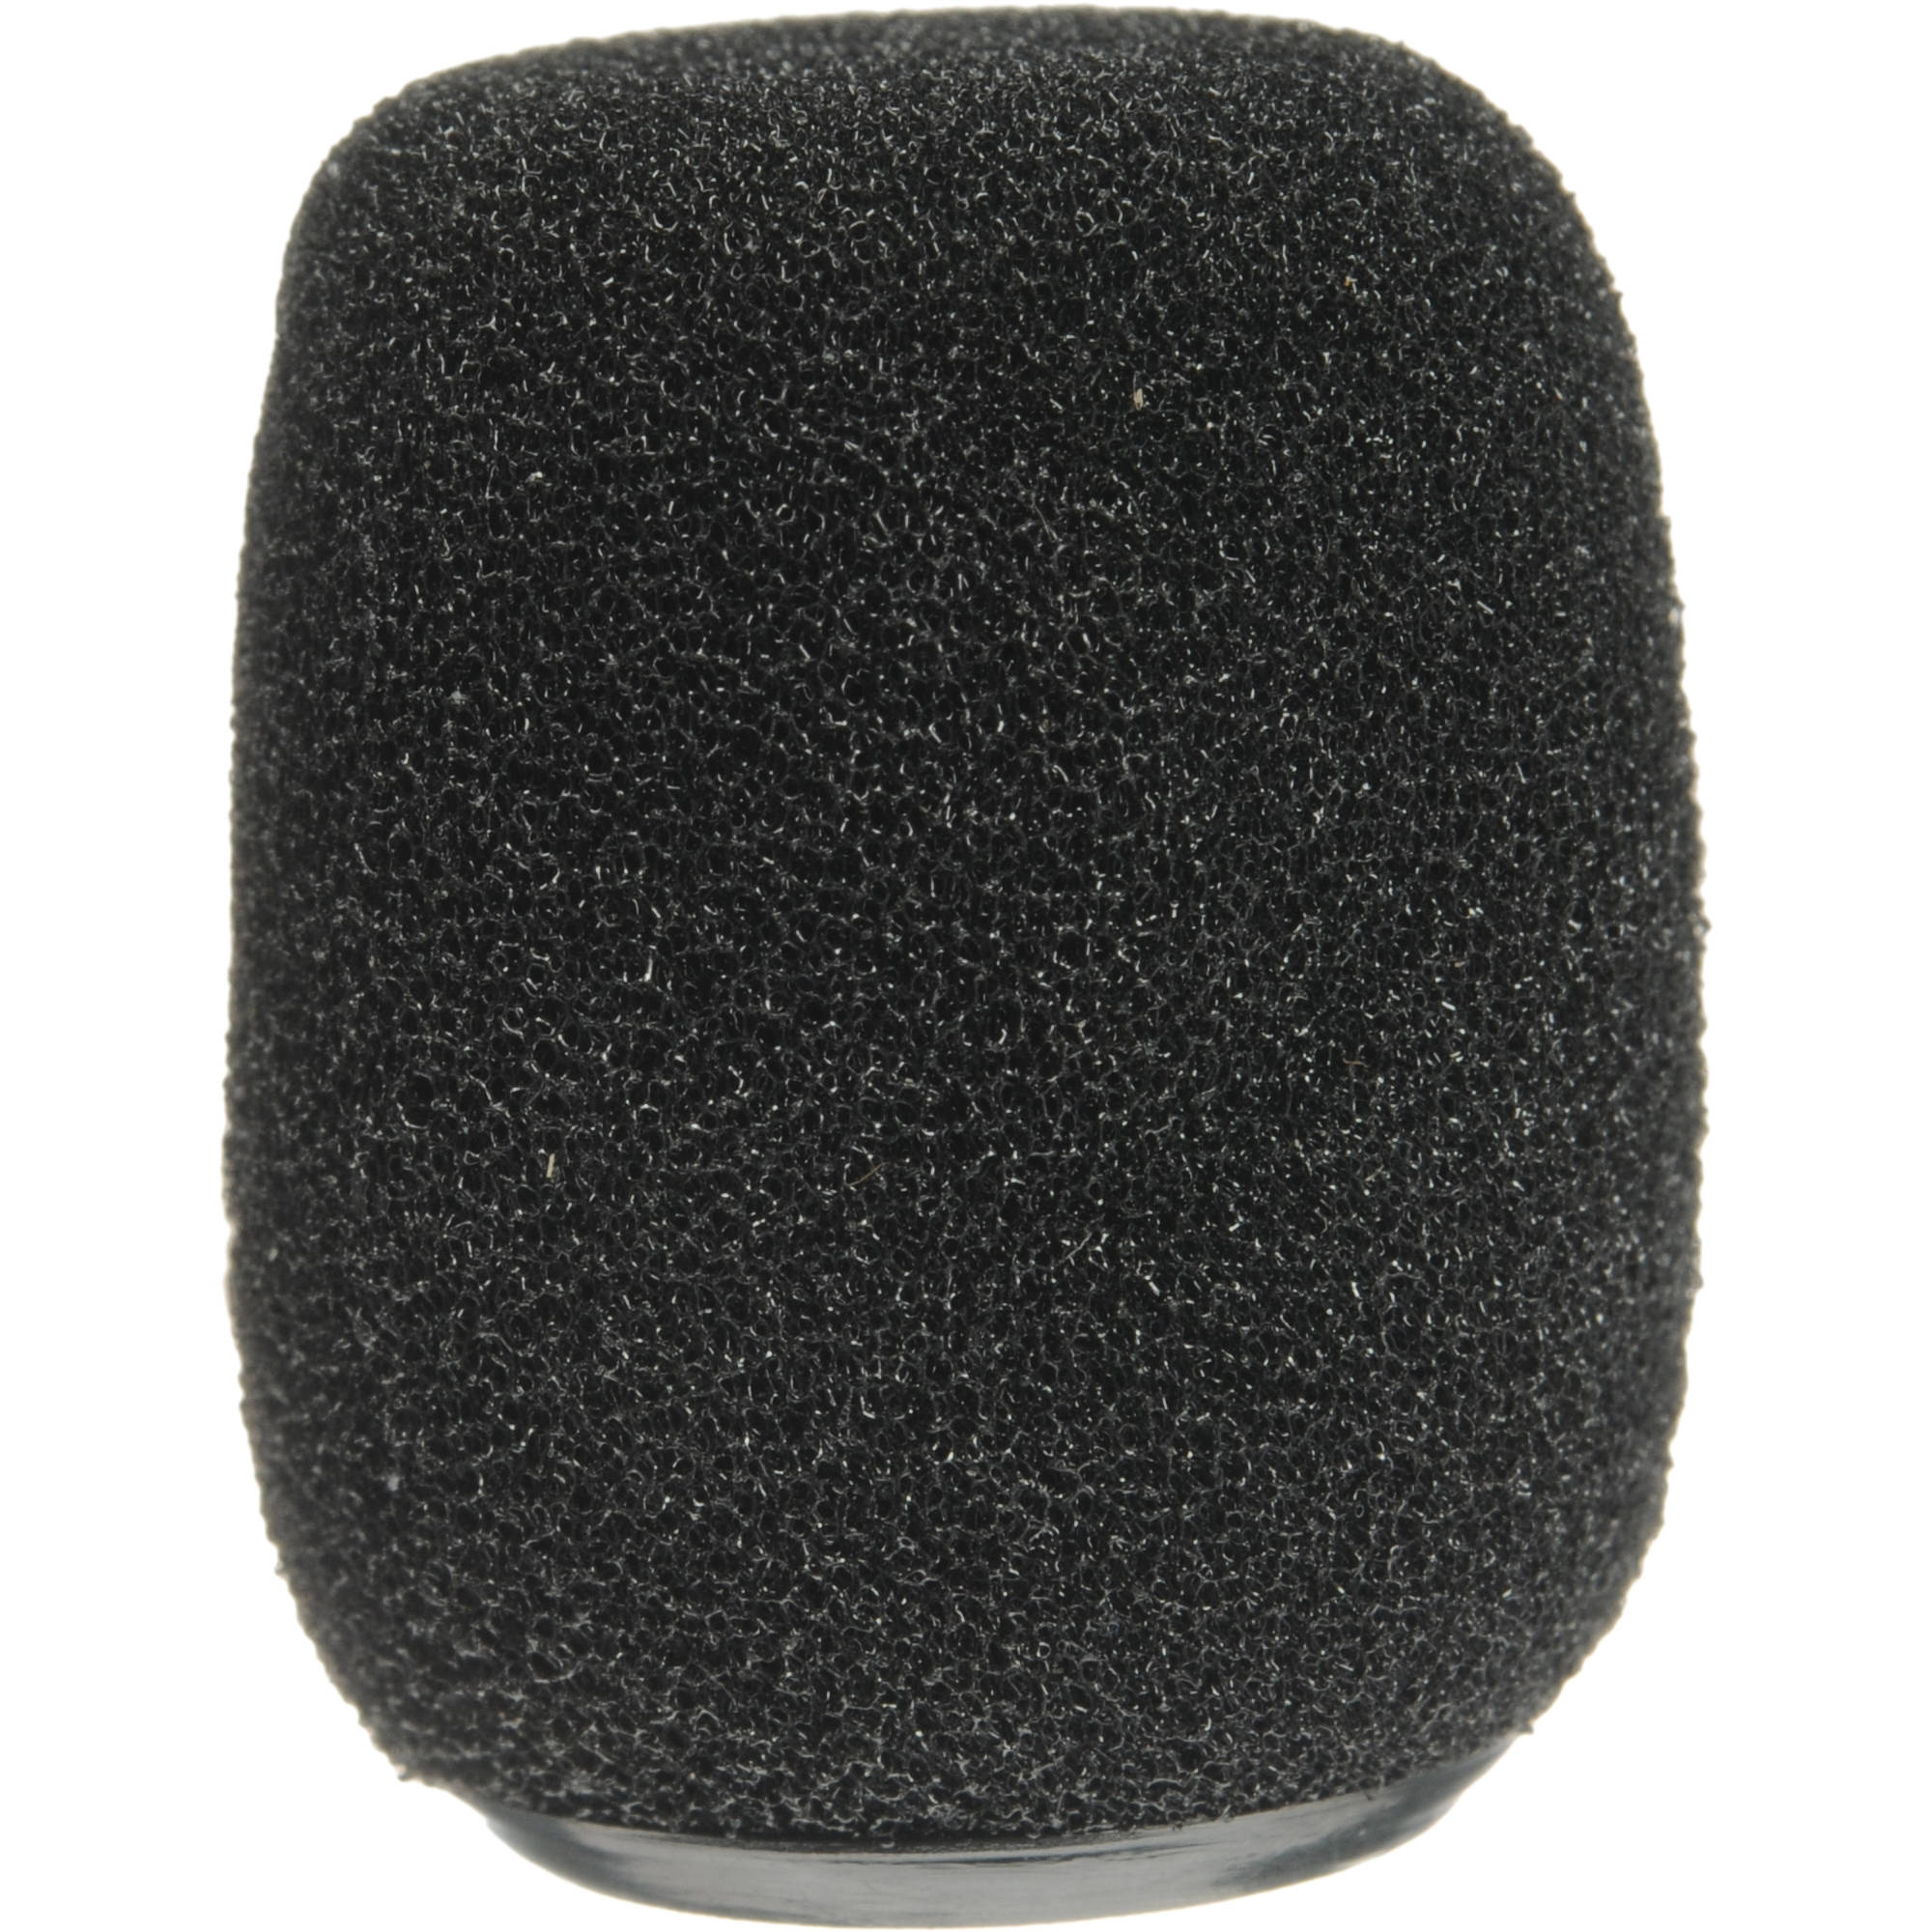 Shure Snap-Fit Windscreen for Select Shure Microphones (4 Pack)